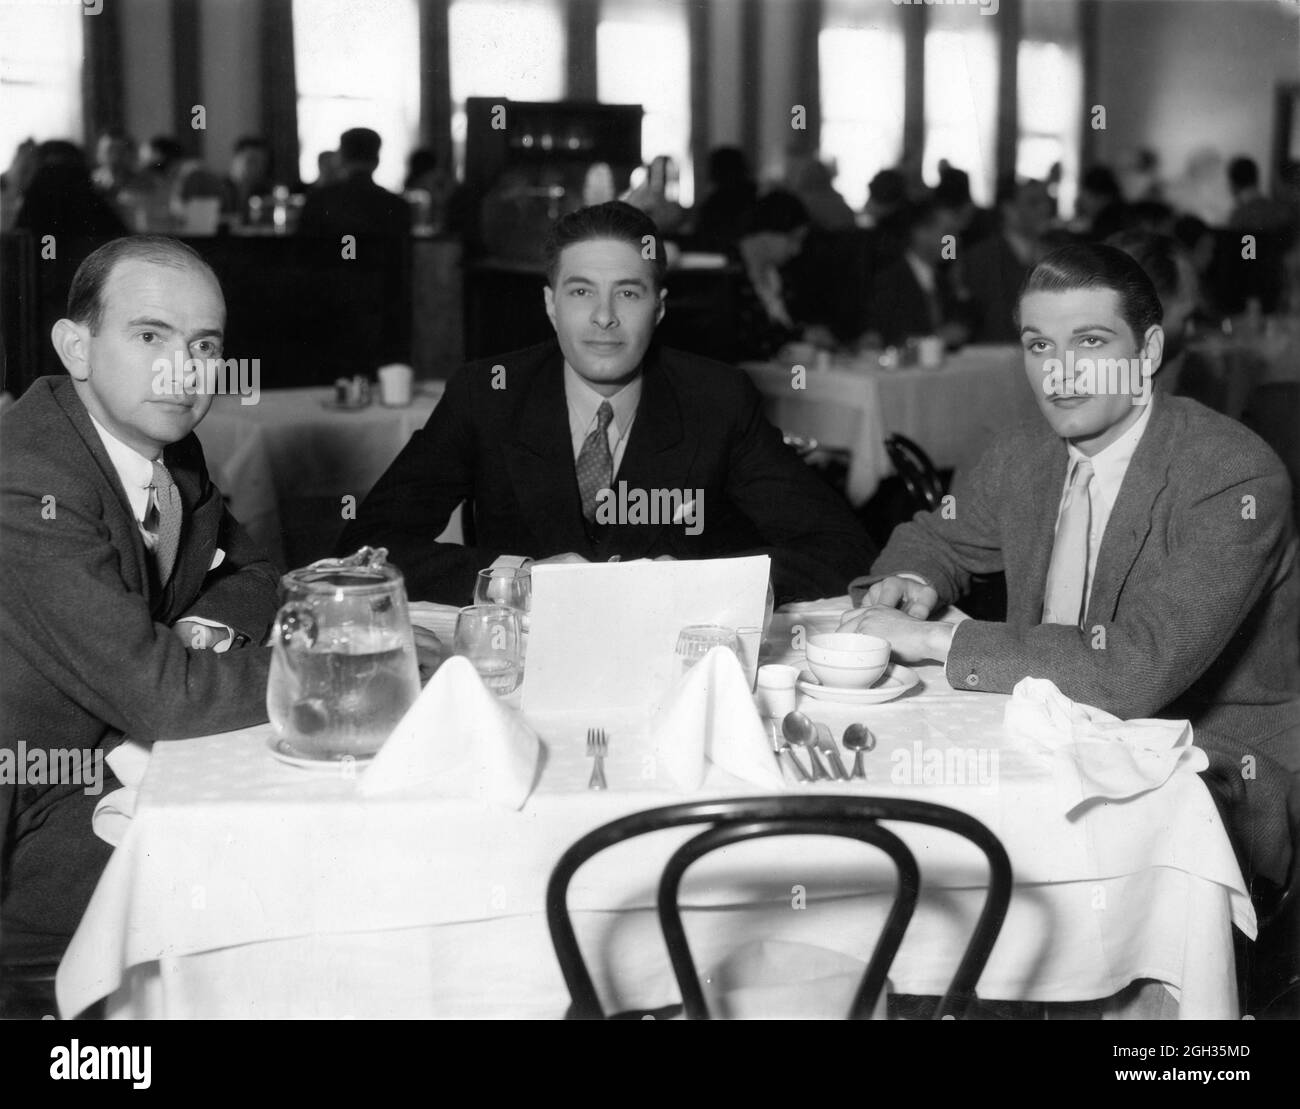 Story Editor KENNETH MacGOWAN and co-stars IRVING PICHEL and LAURENCE OLIVIER lunching at the Studio Cafe during a break in filming of  WESTWARD PASSAGE 1932 director ROBERT MILTON story Margaret Ayer Barnes costume design Josette De Lima musical director Max Steiner executive producer David O. Selznick RKO Pathe Pictures Stock Photo